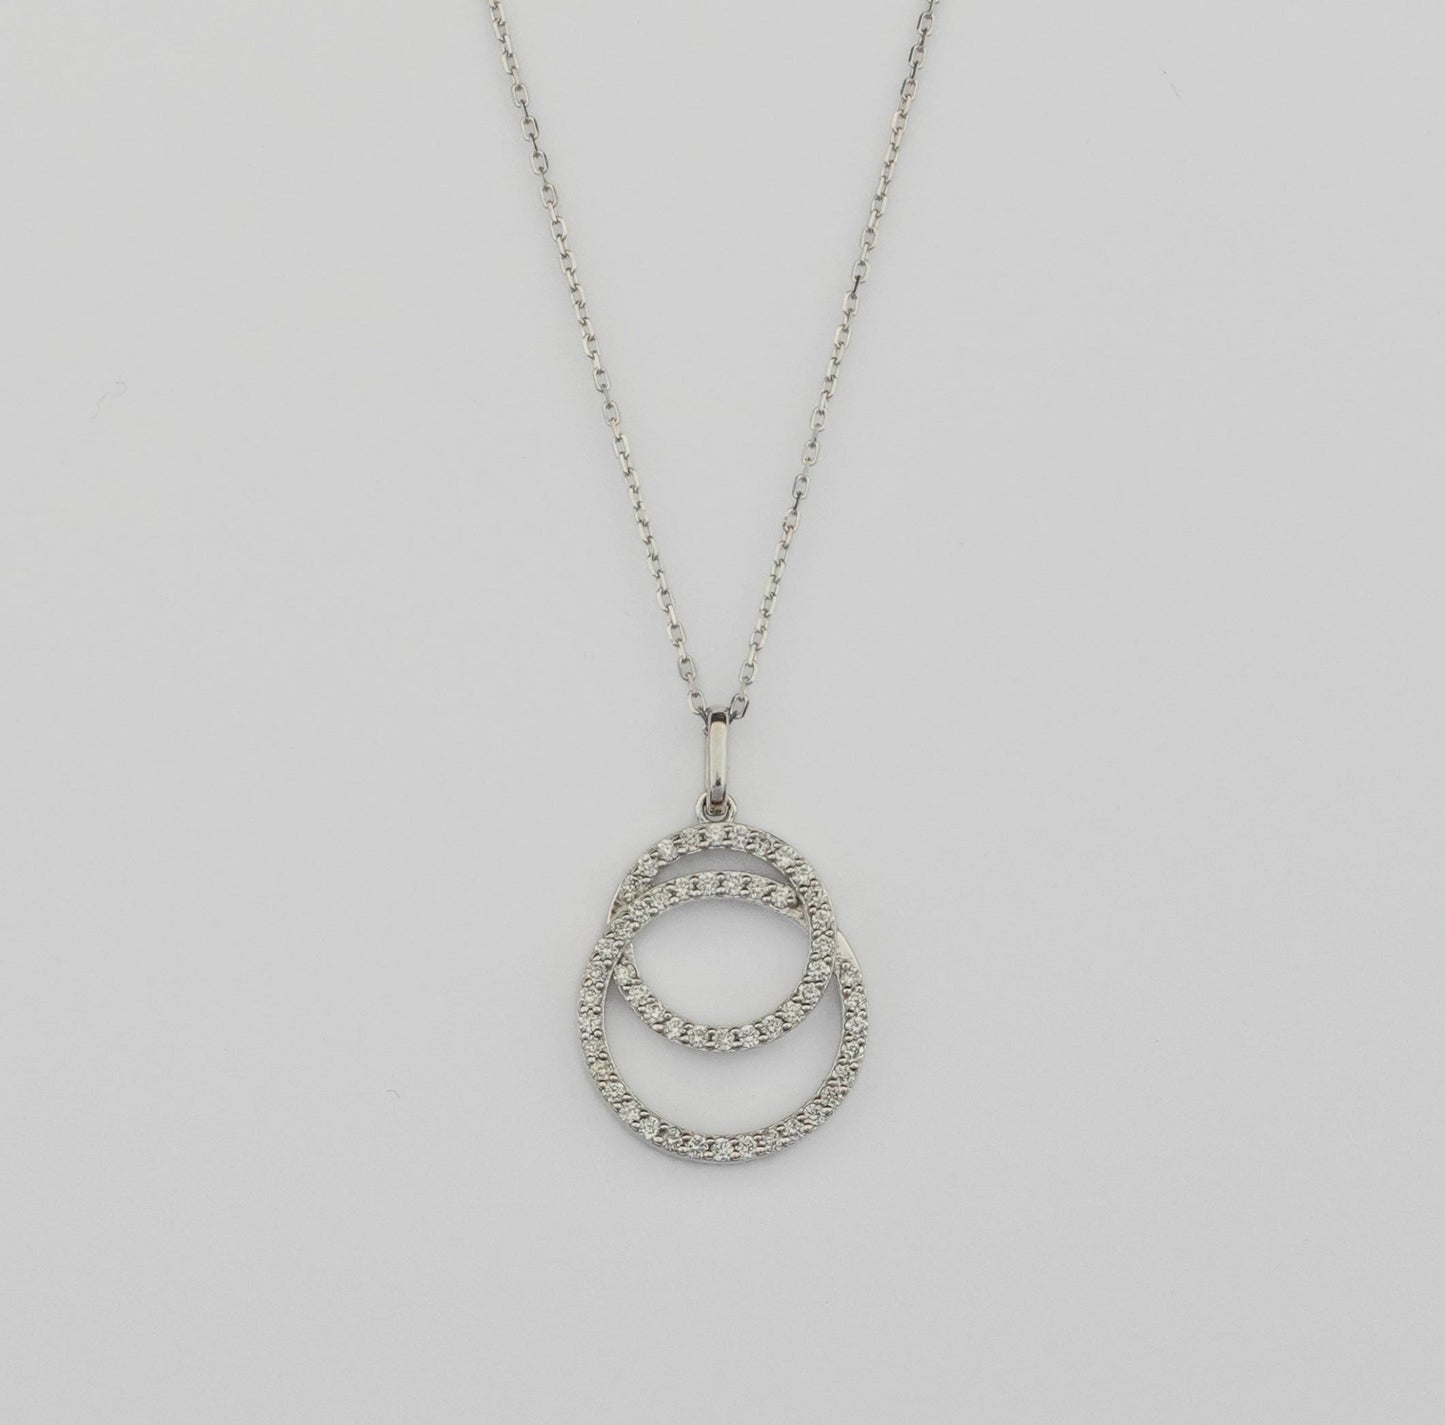 Neo Necklace in Diamond - 18k Gold - Lynor